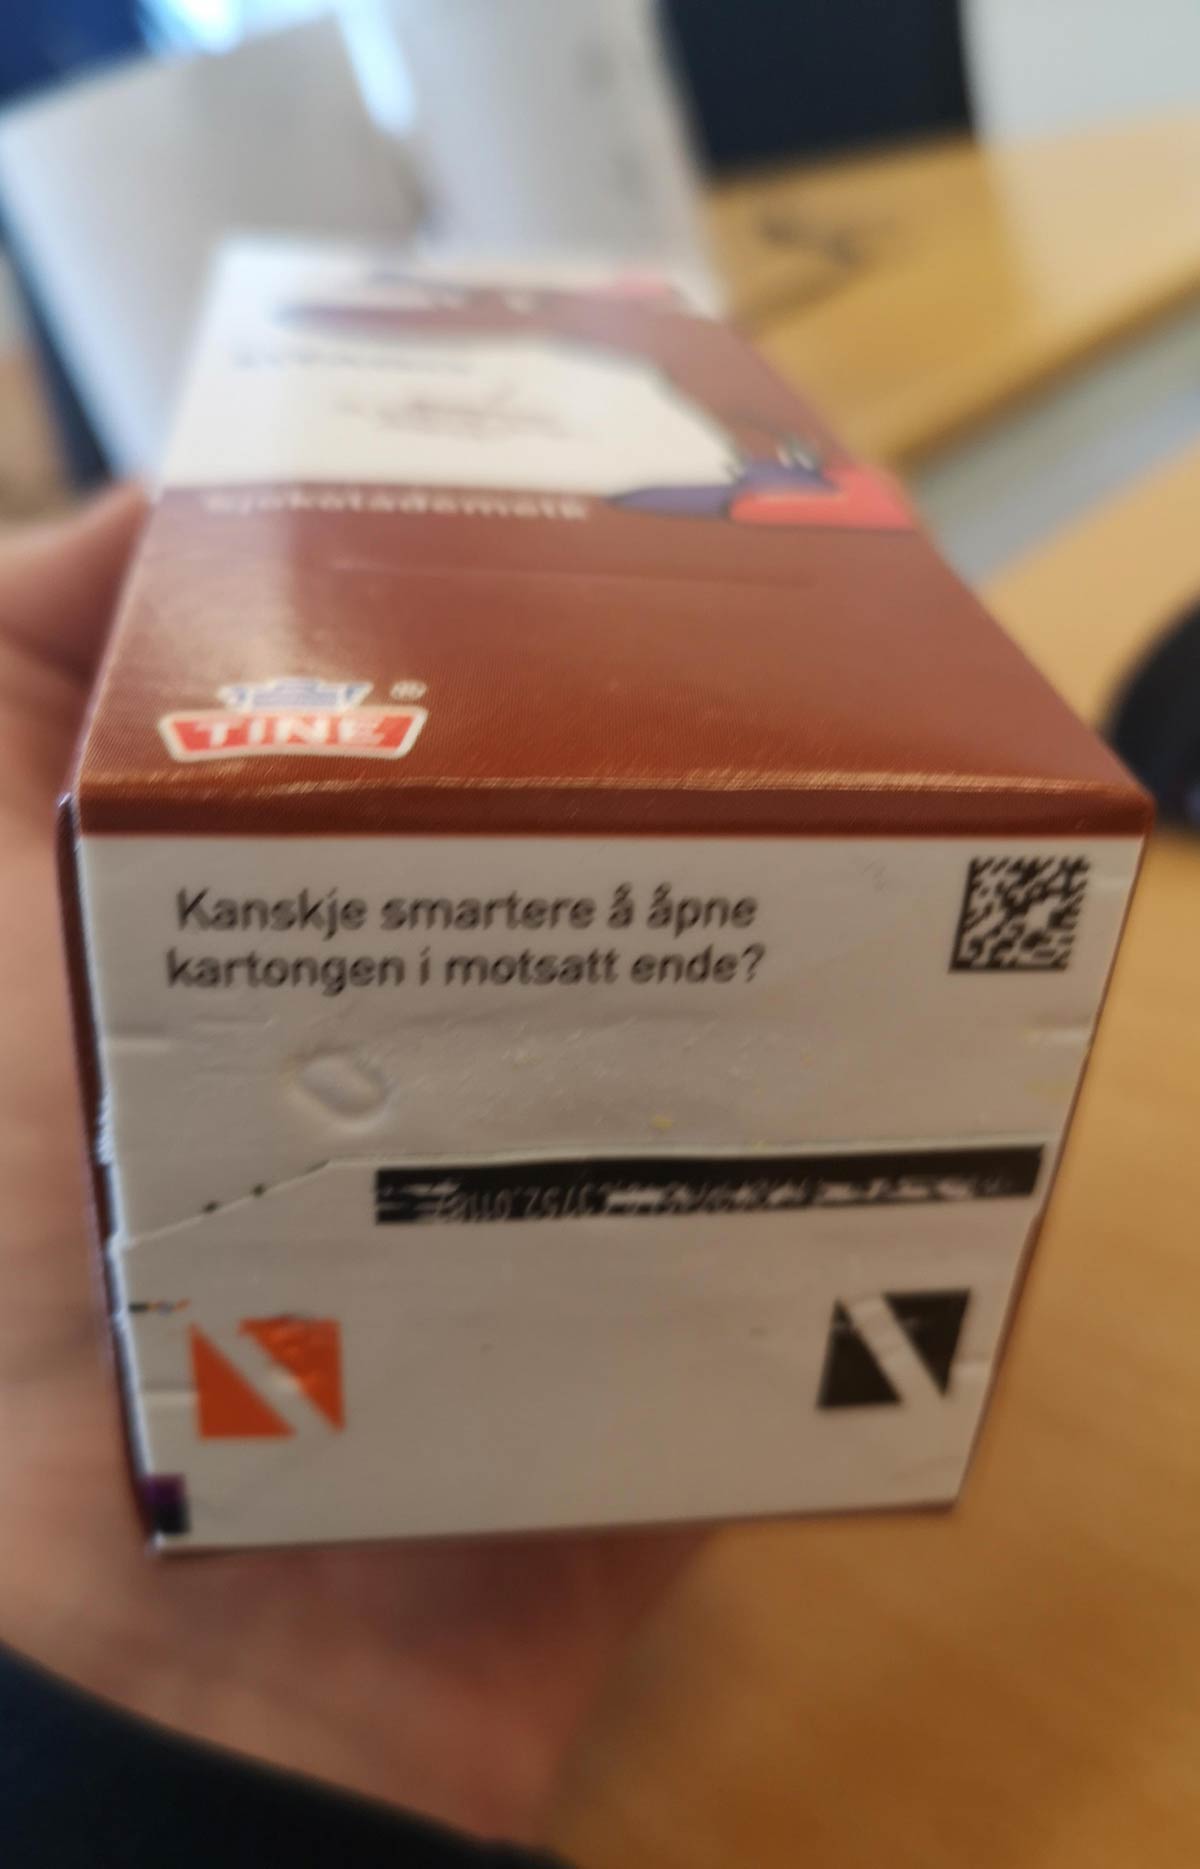 The bottom of this chocolate milk carton says "Maybe smarter to open in the other end"